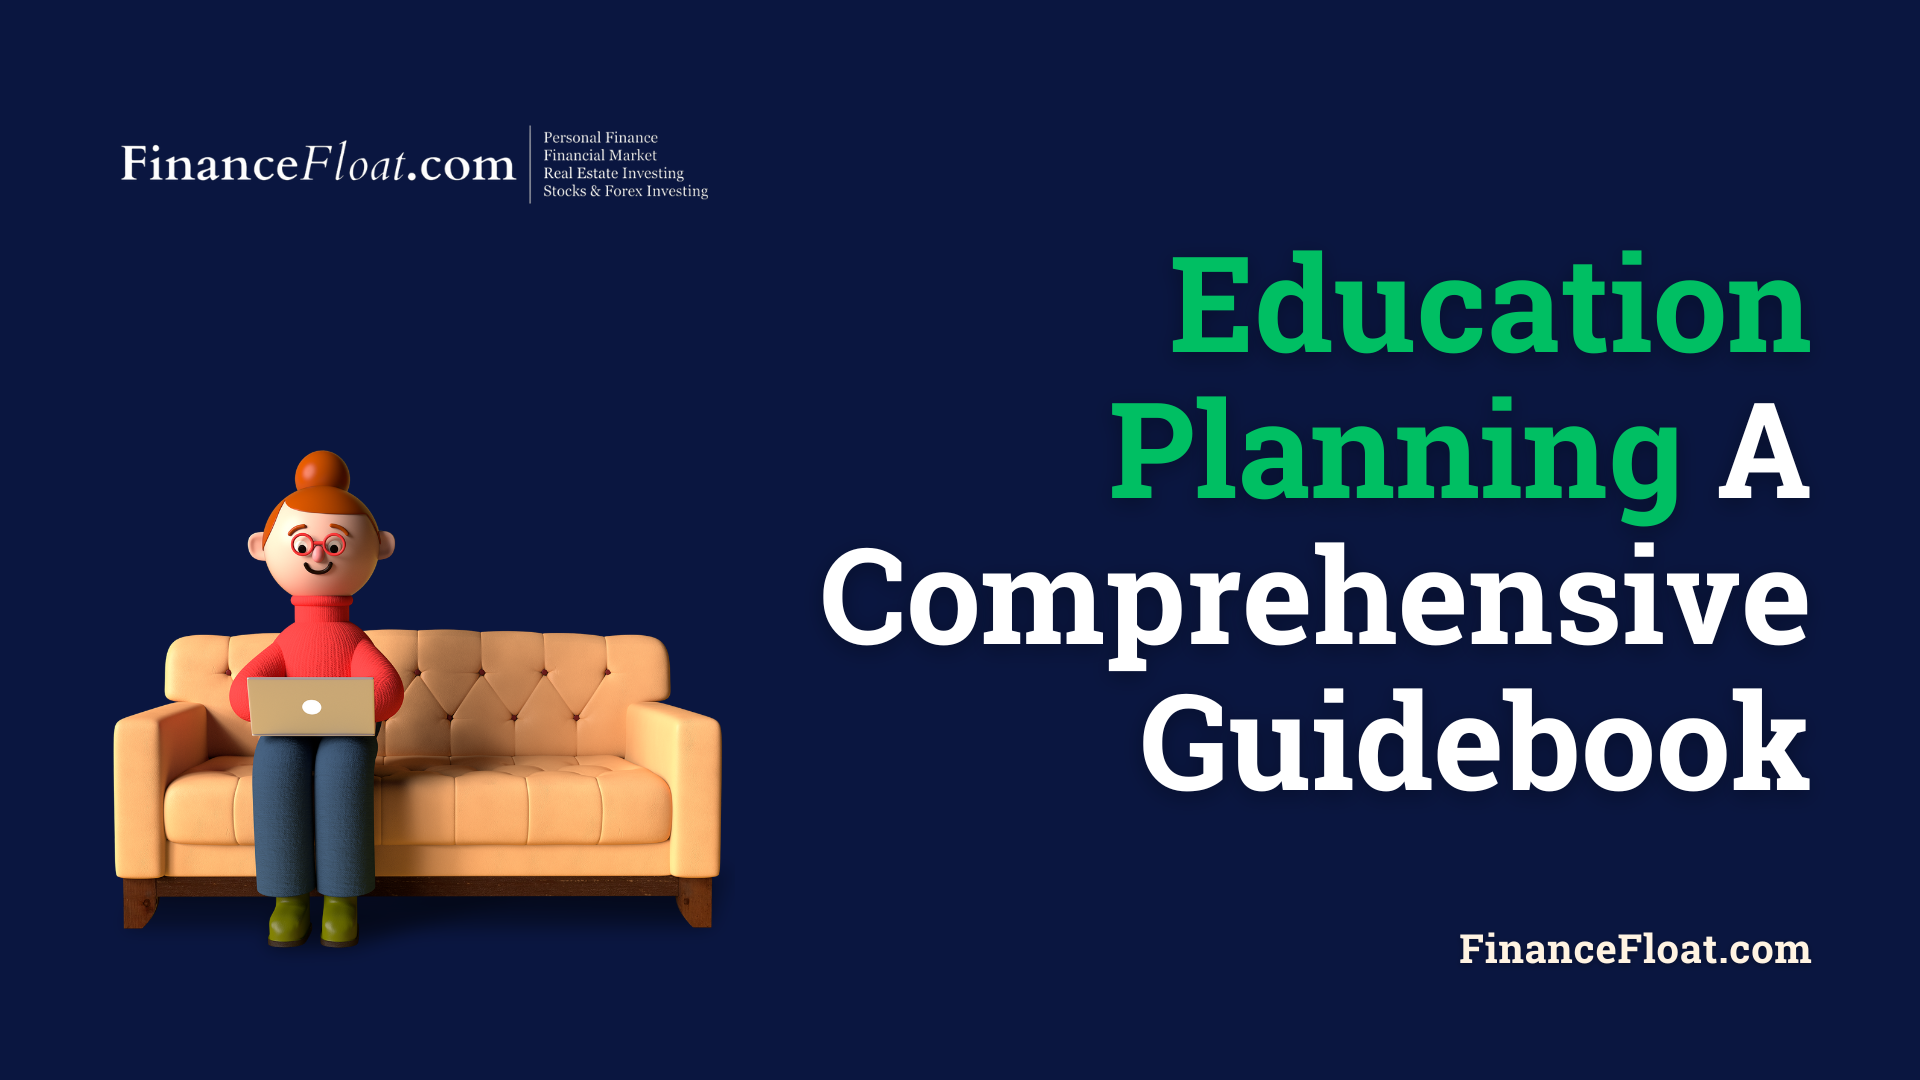 Education Planning A Comprehensive Guidebook